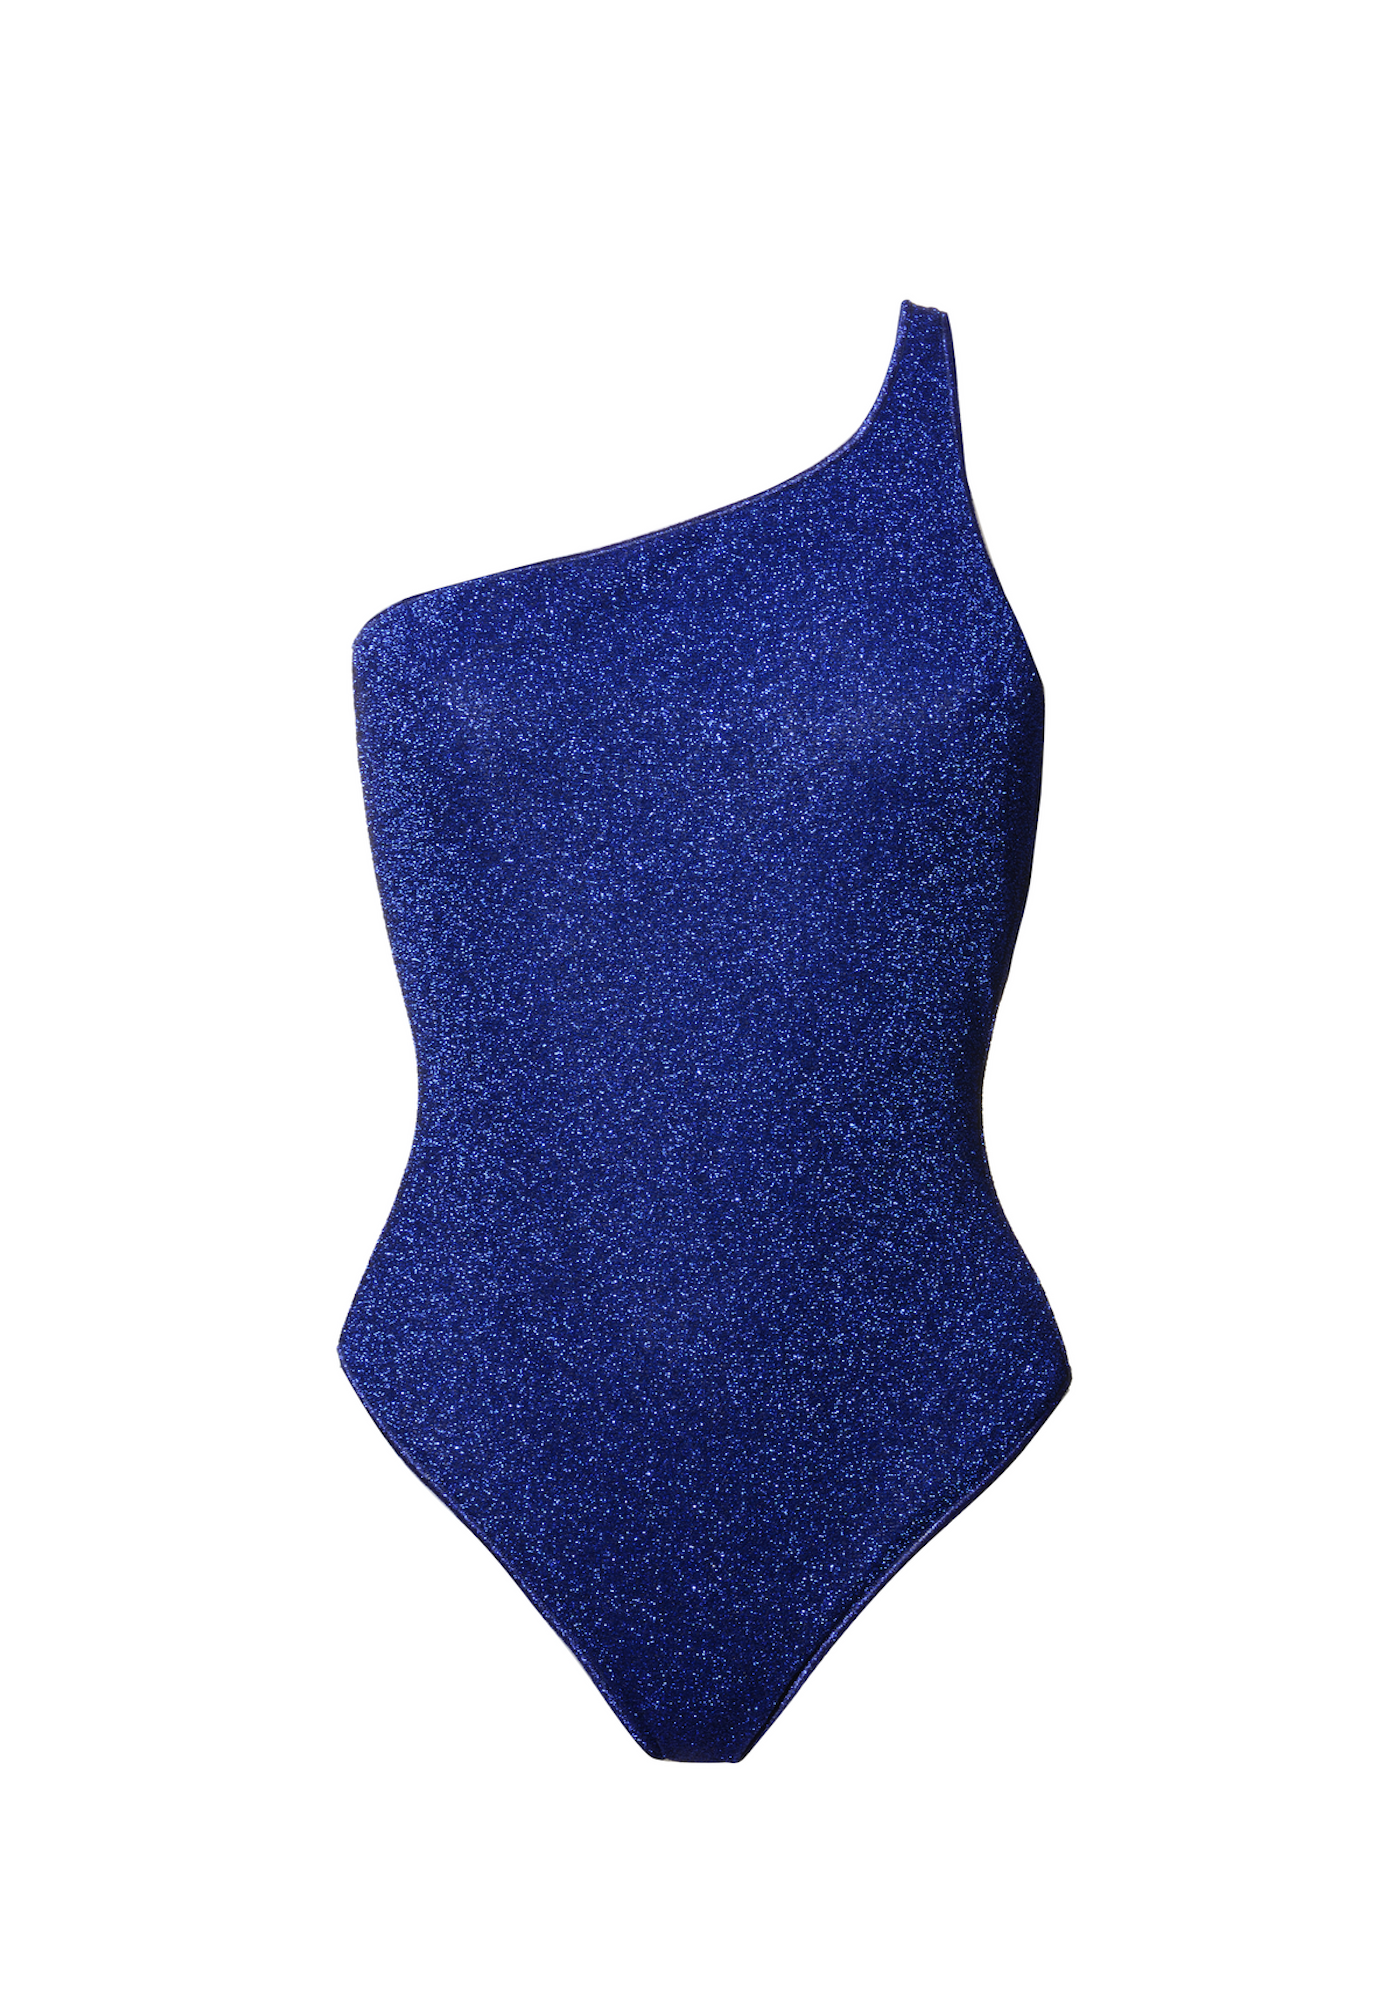 LUMIERE ASYMMETRICAL MAILLOT IN BLUE